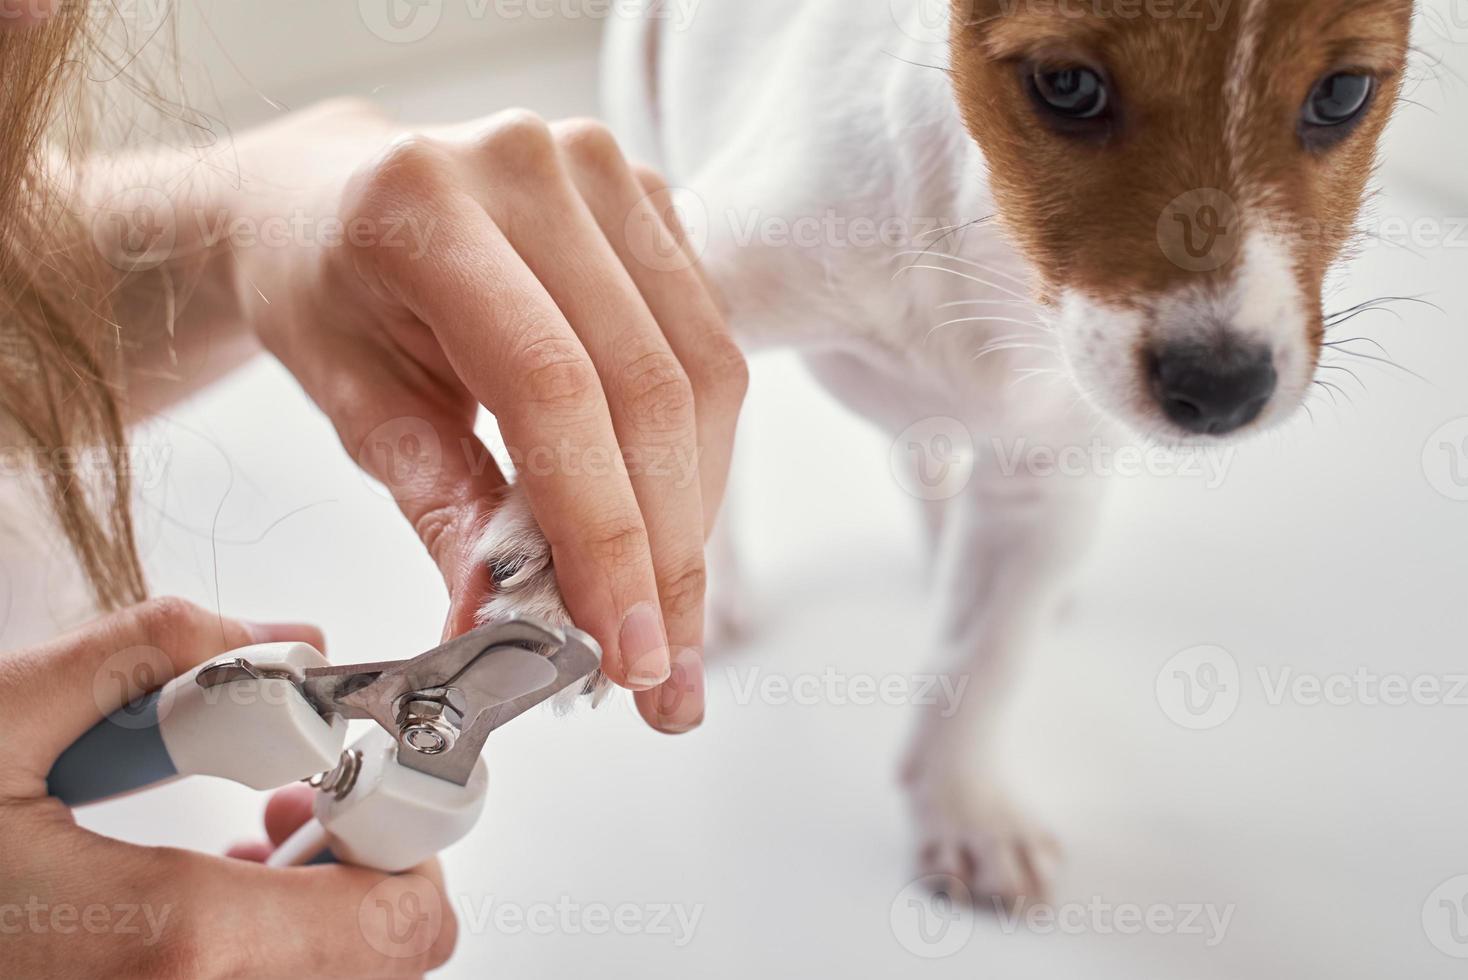 Owner cuts nails jack russel terrier puppy dog with a scissors photo